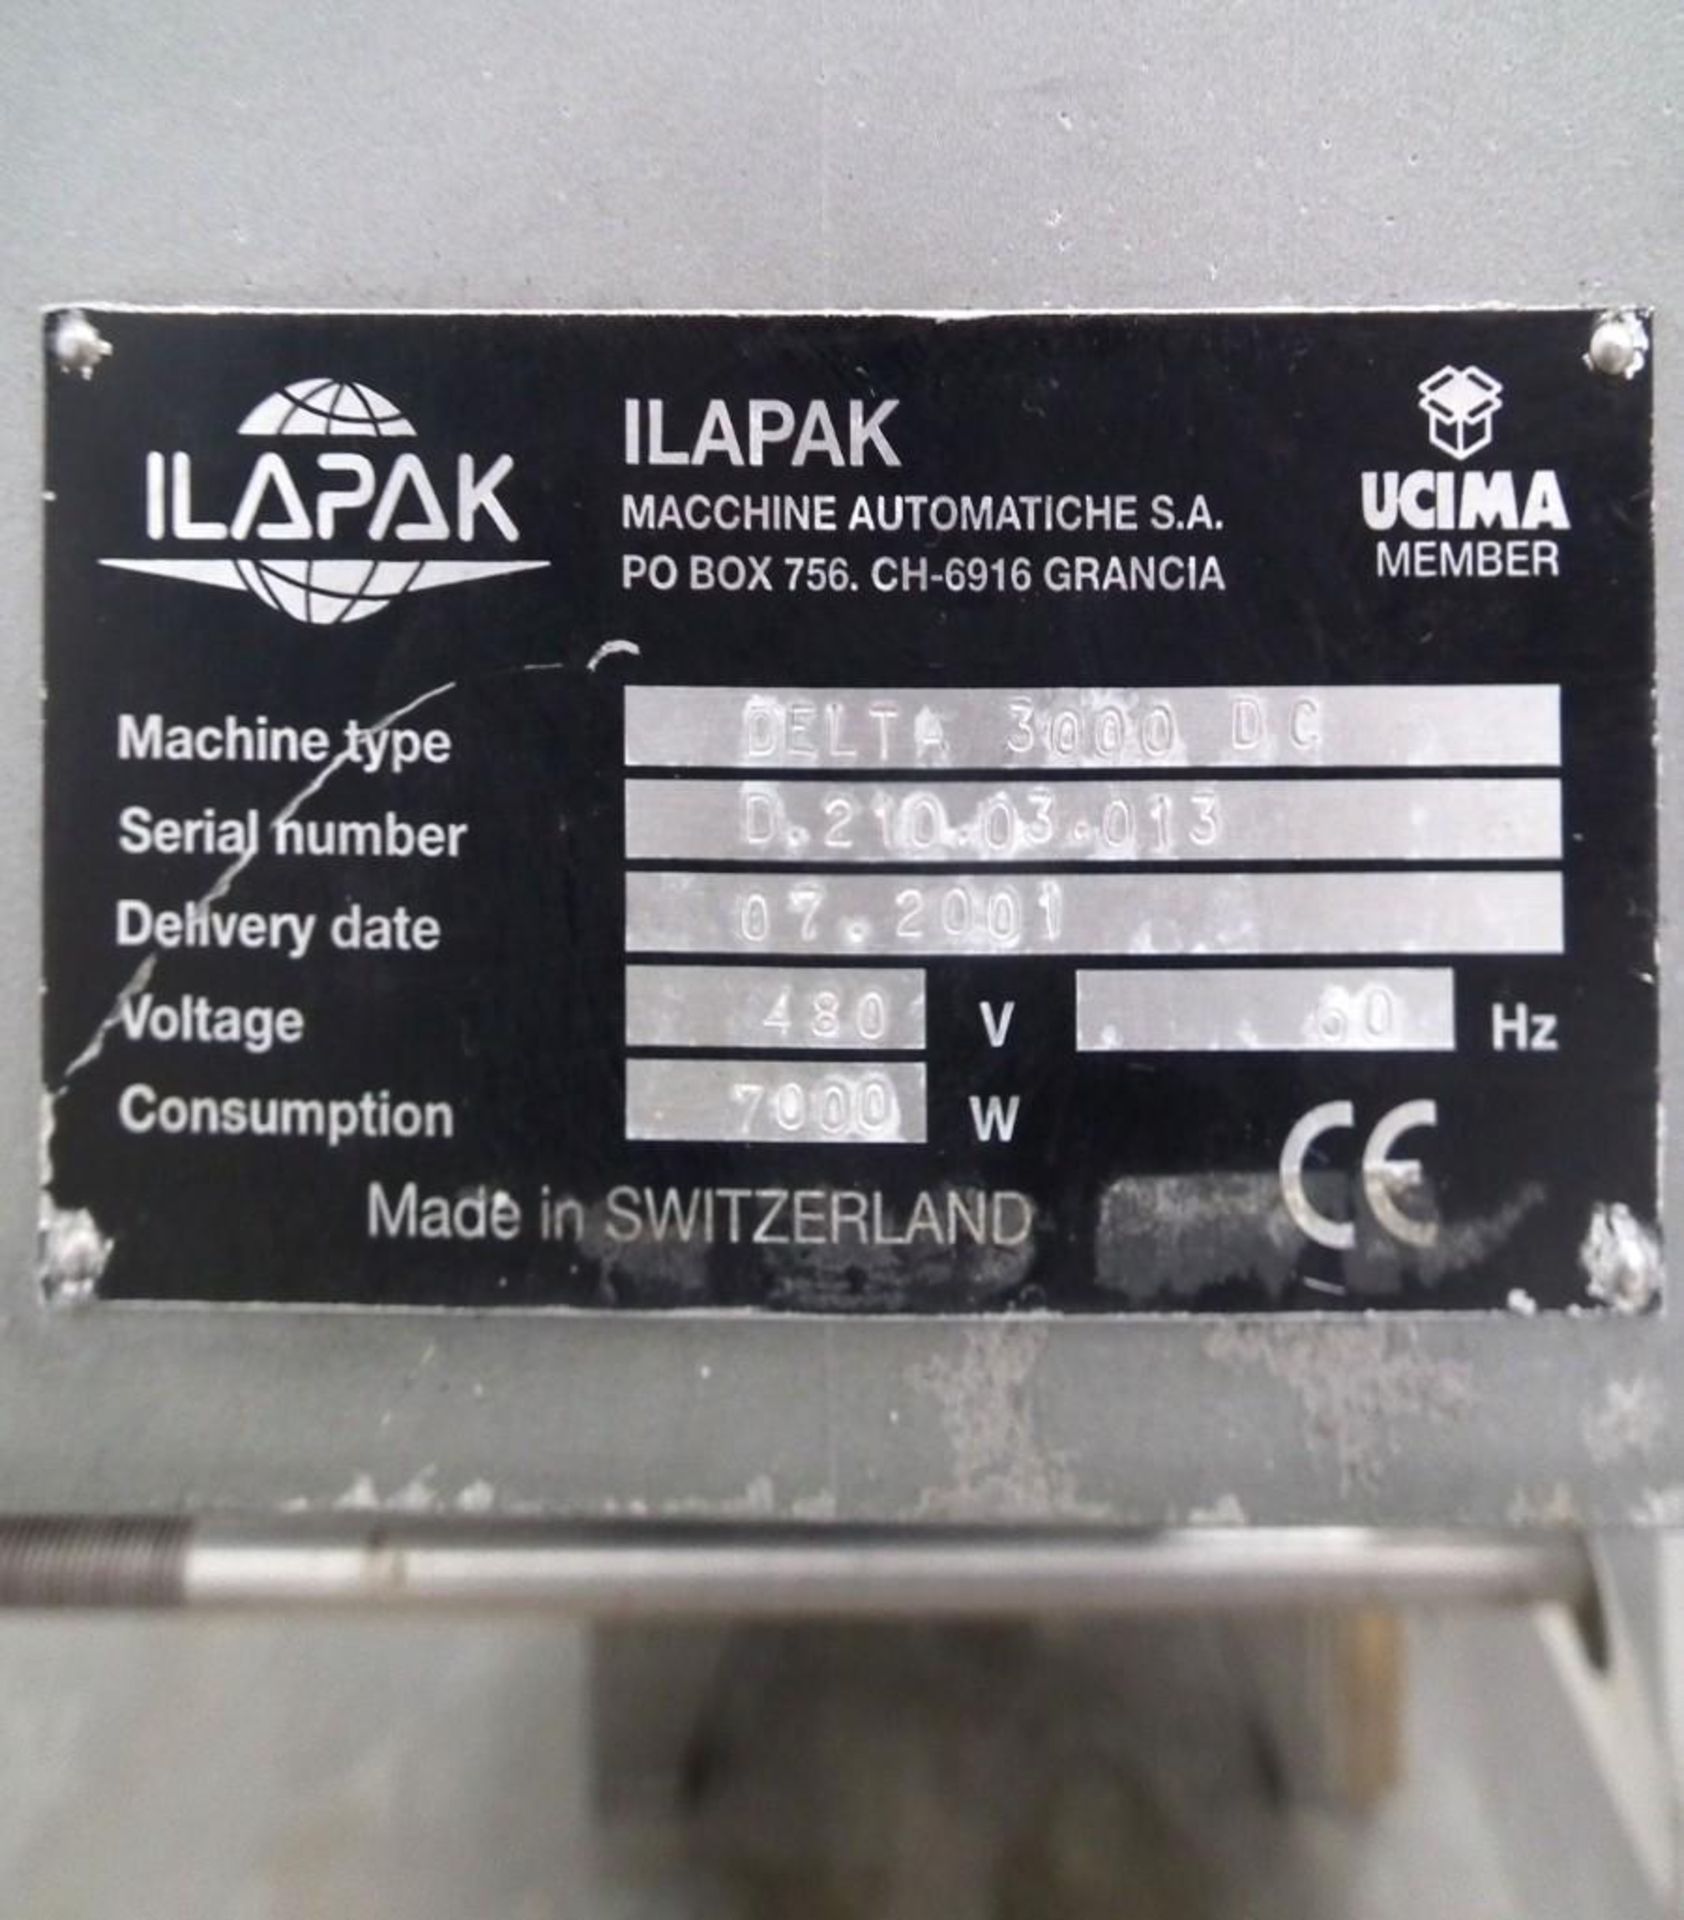 Ilapak Delta 3000 DC Stainless Wrapper - Image 4 of 8